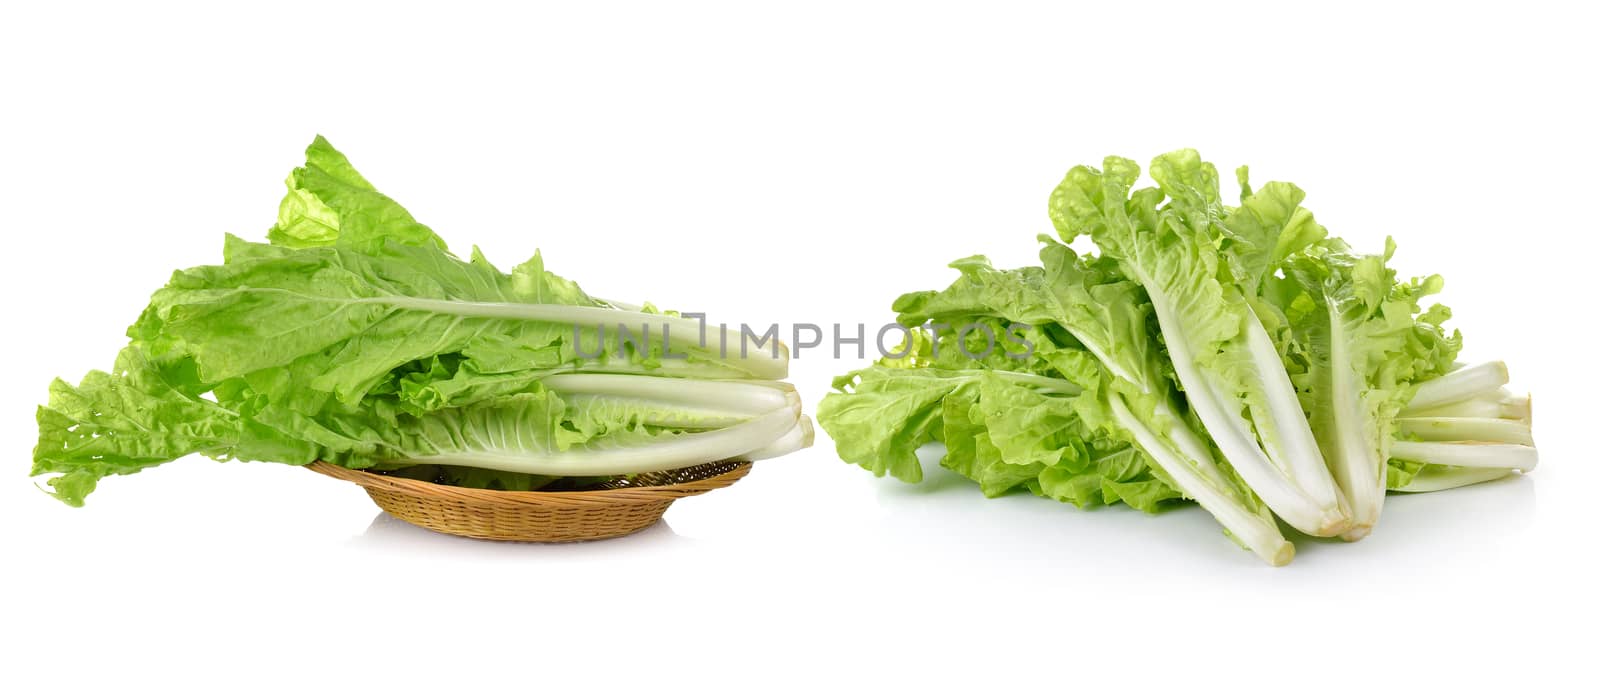 lettuce leaves isolated on white background by sommai